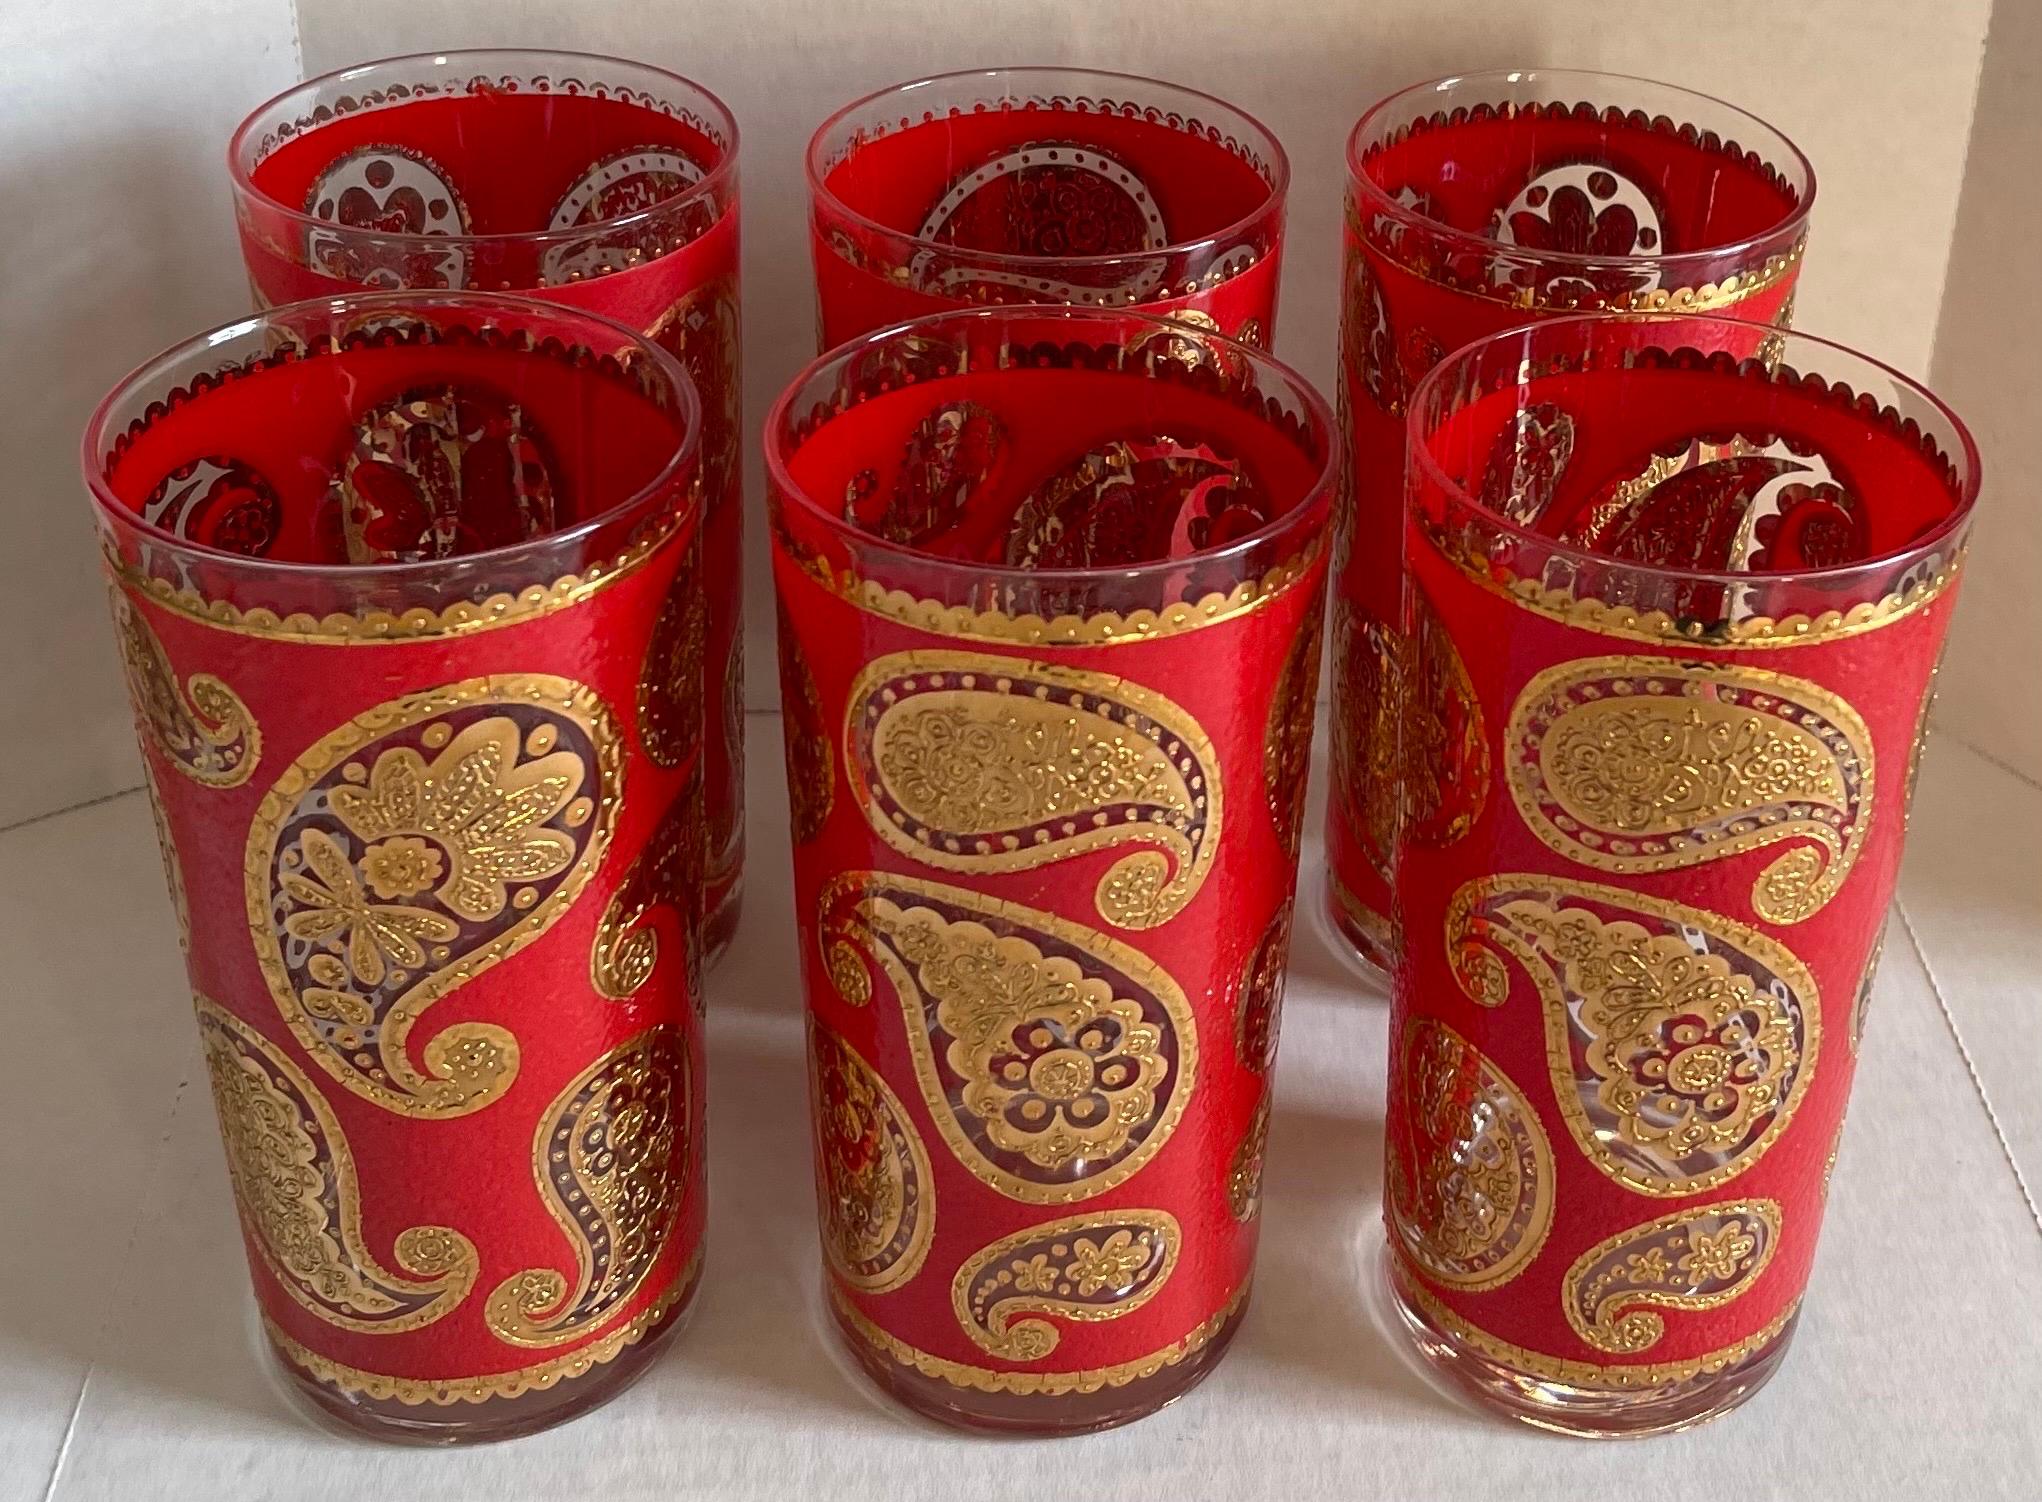 Set of 6 1960s red paisley highball glasses by Culver. Red and gold all over paisley design.